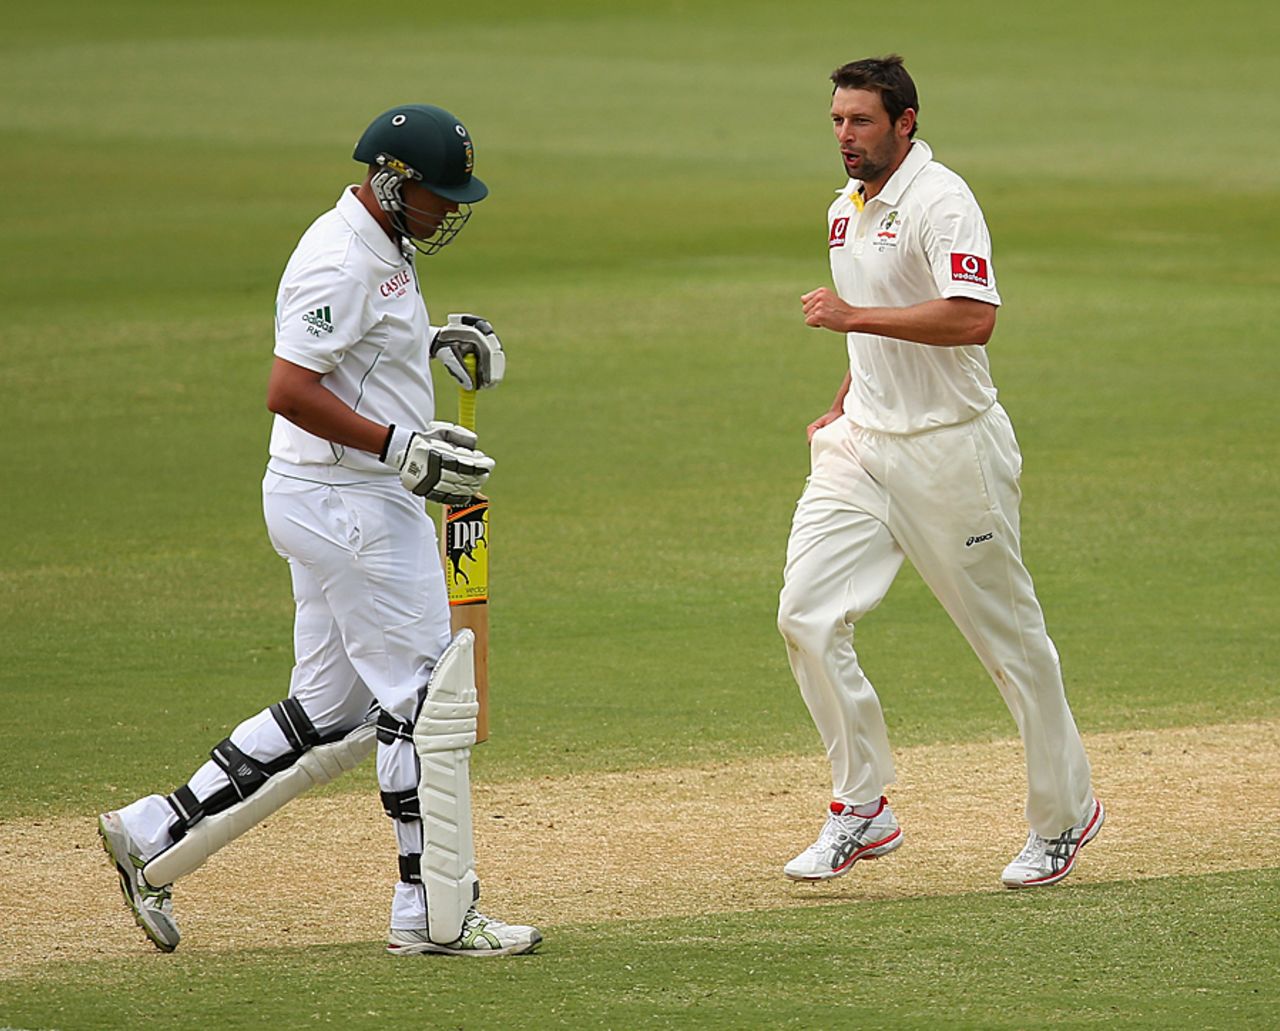 Rory Kleinveldt was bowled out by Ben Hilfenhaus, Australia v South Africa, 2nd Test, Adelaide, 3rd day, November 24, 2012